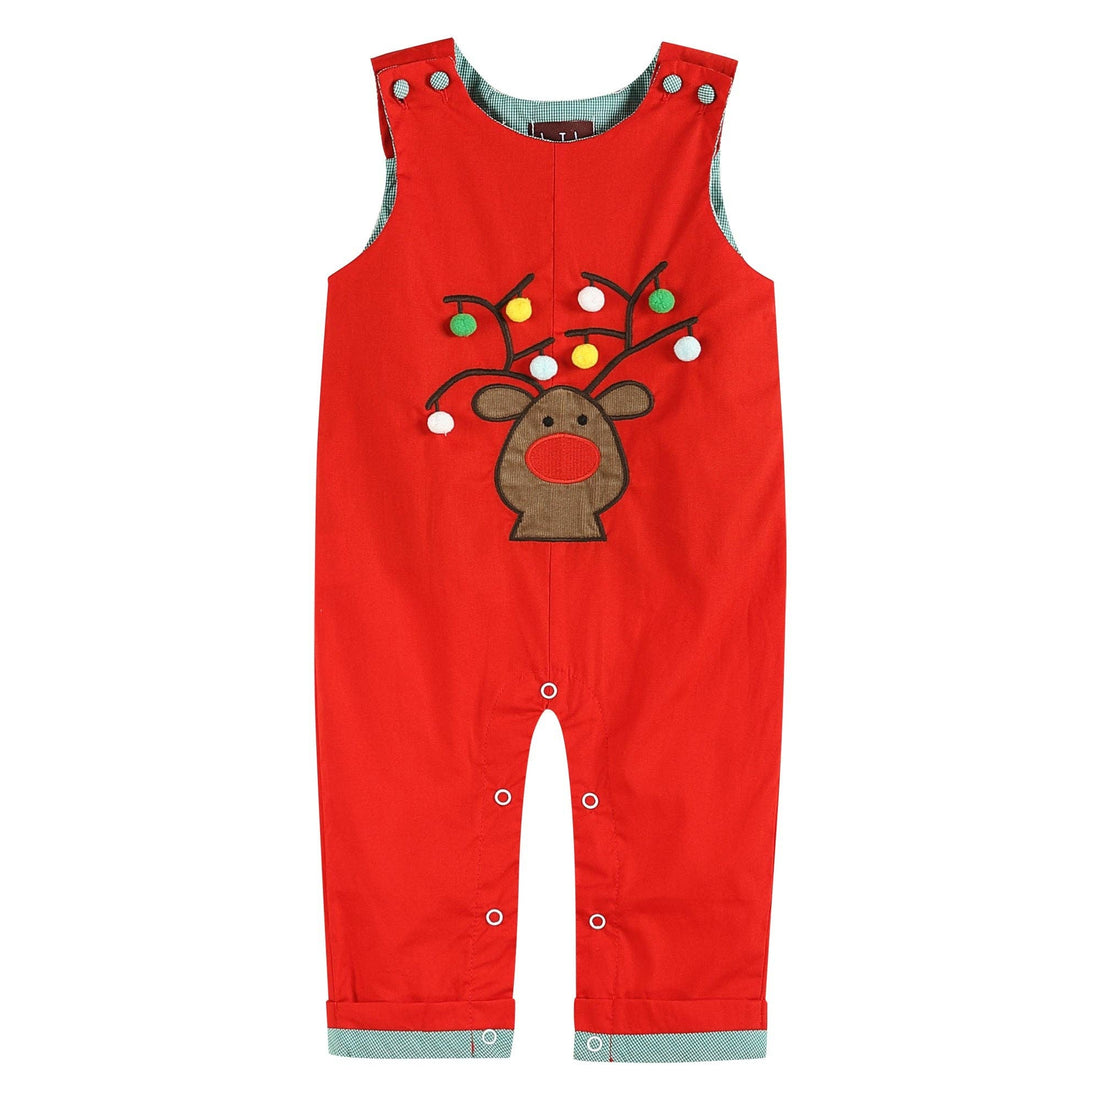 Toddler Red Plaid Reindeer Overalls, Toddler Christmas Outfit - Gathering Littles